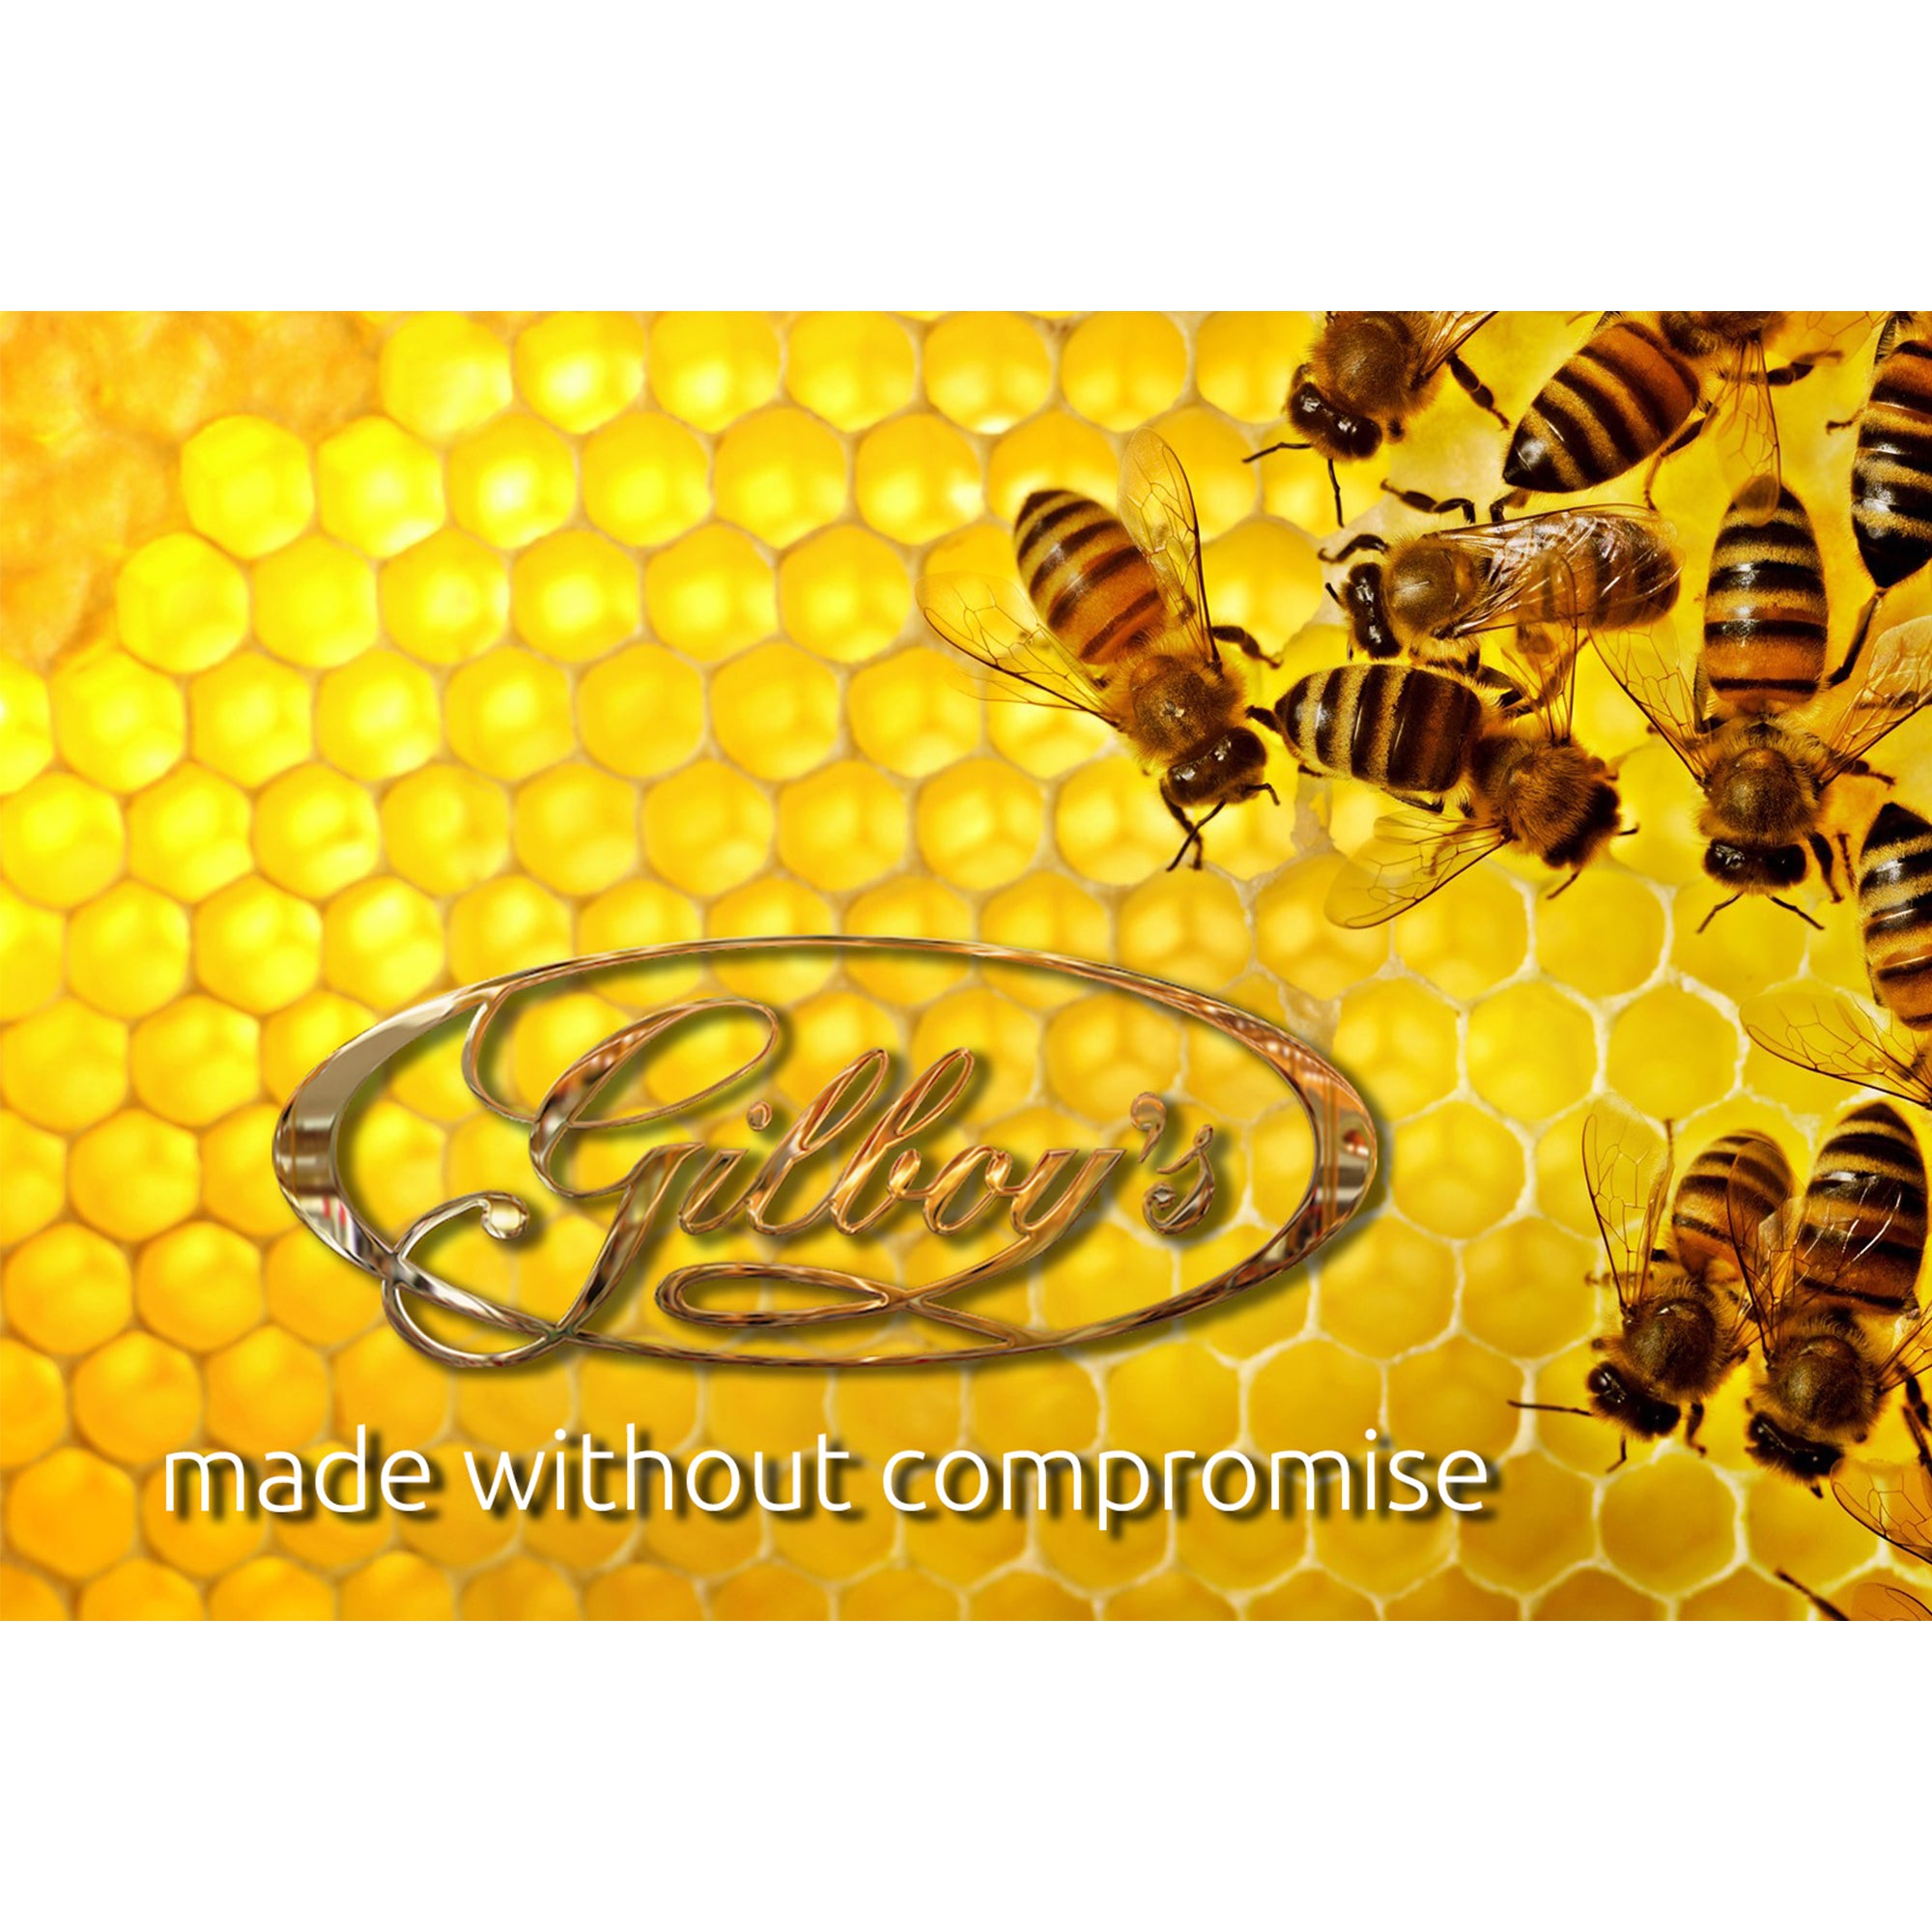 Gilboys Made without Compromise bees